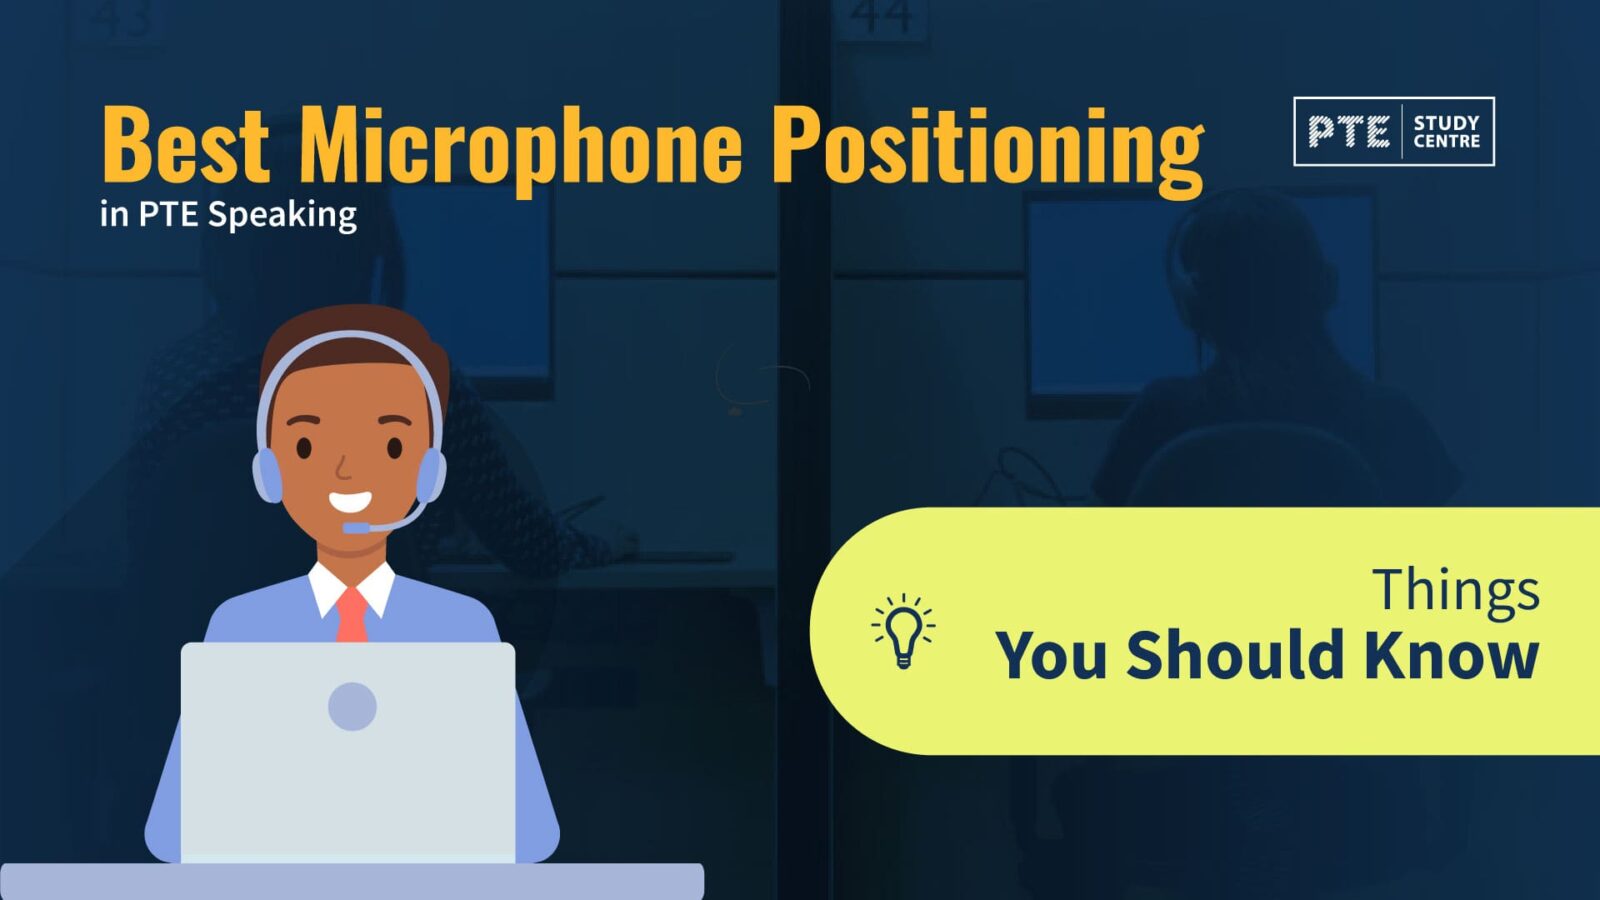 Best Microphone Positioning in PTE Speaking image